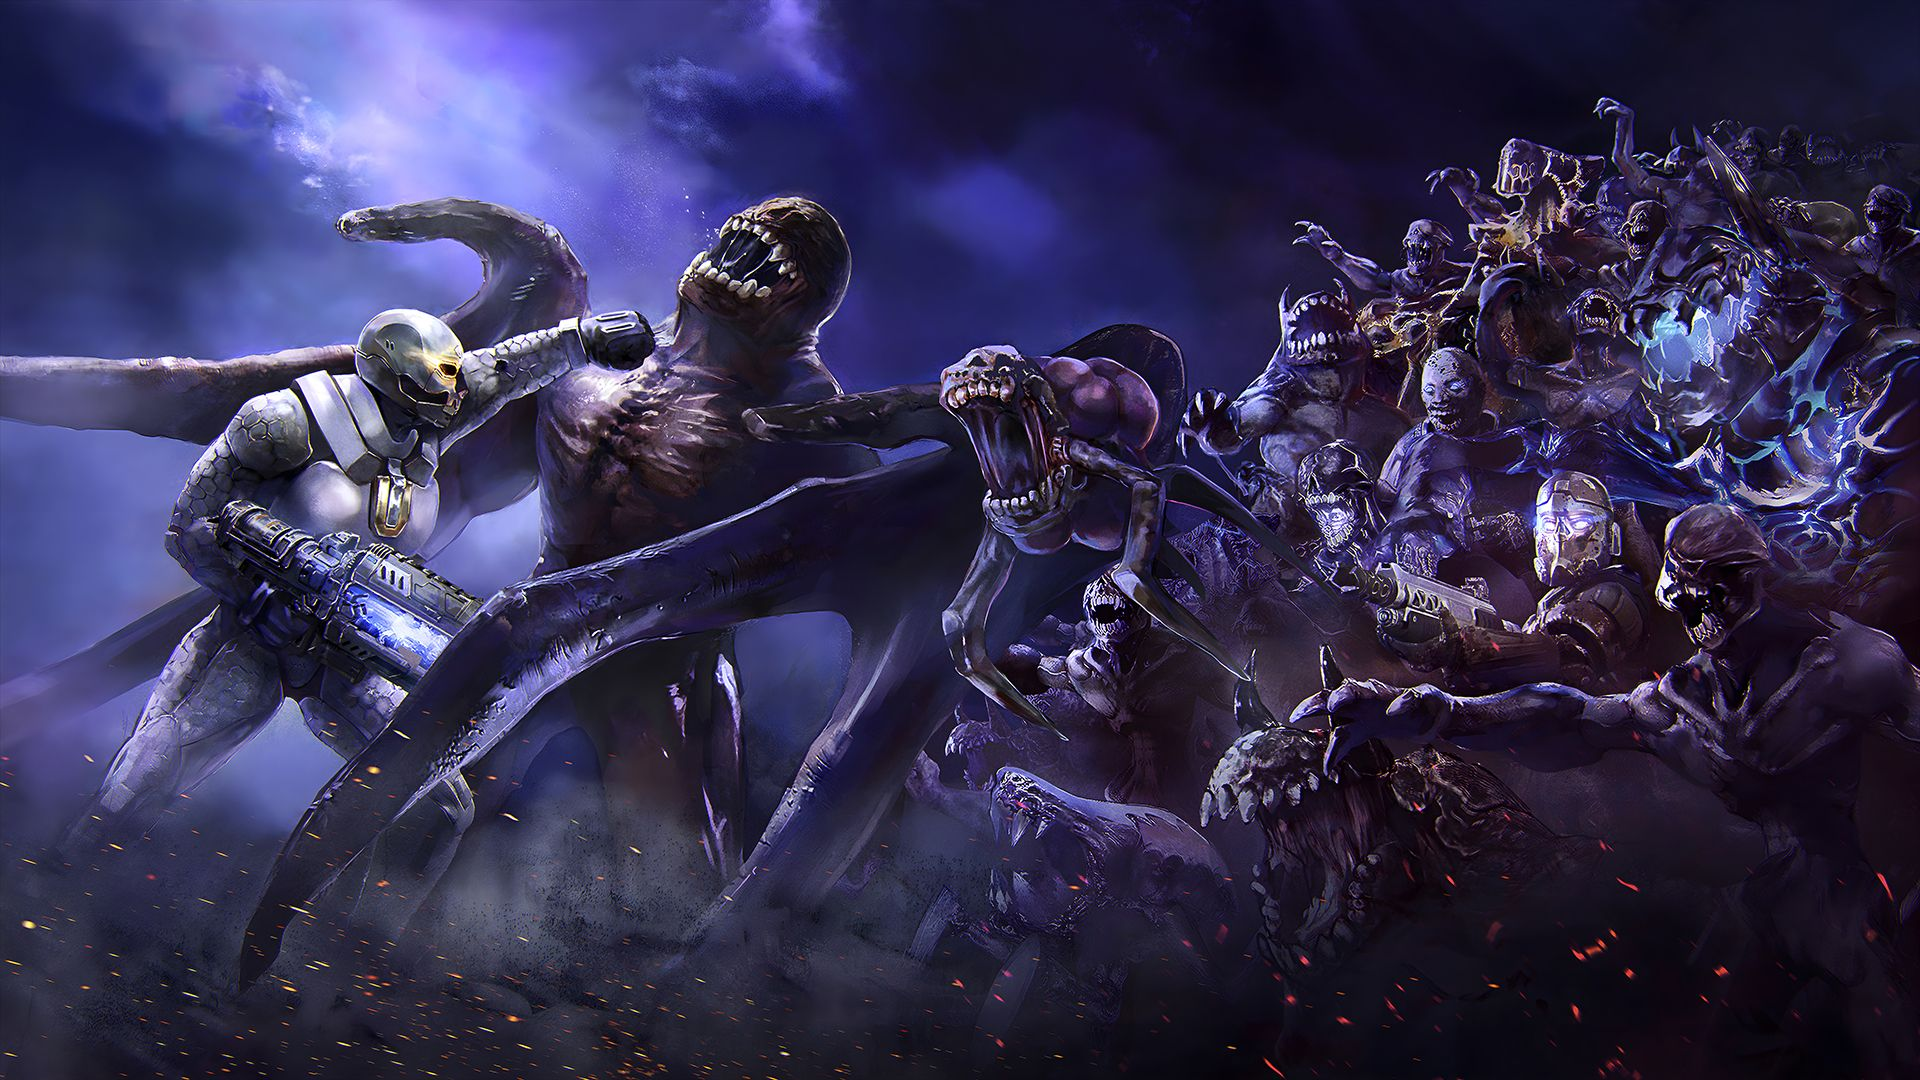 Ke Art of the player cahracter fighting through a horde of monsters